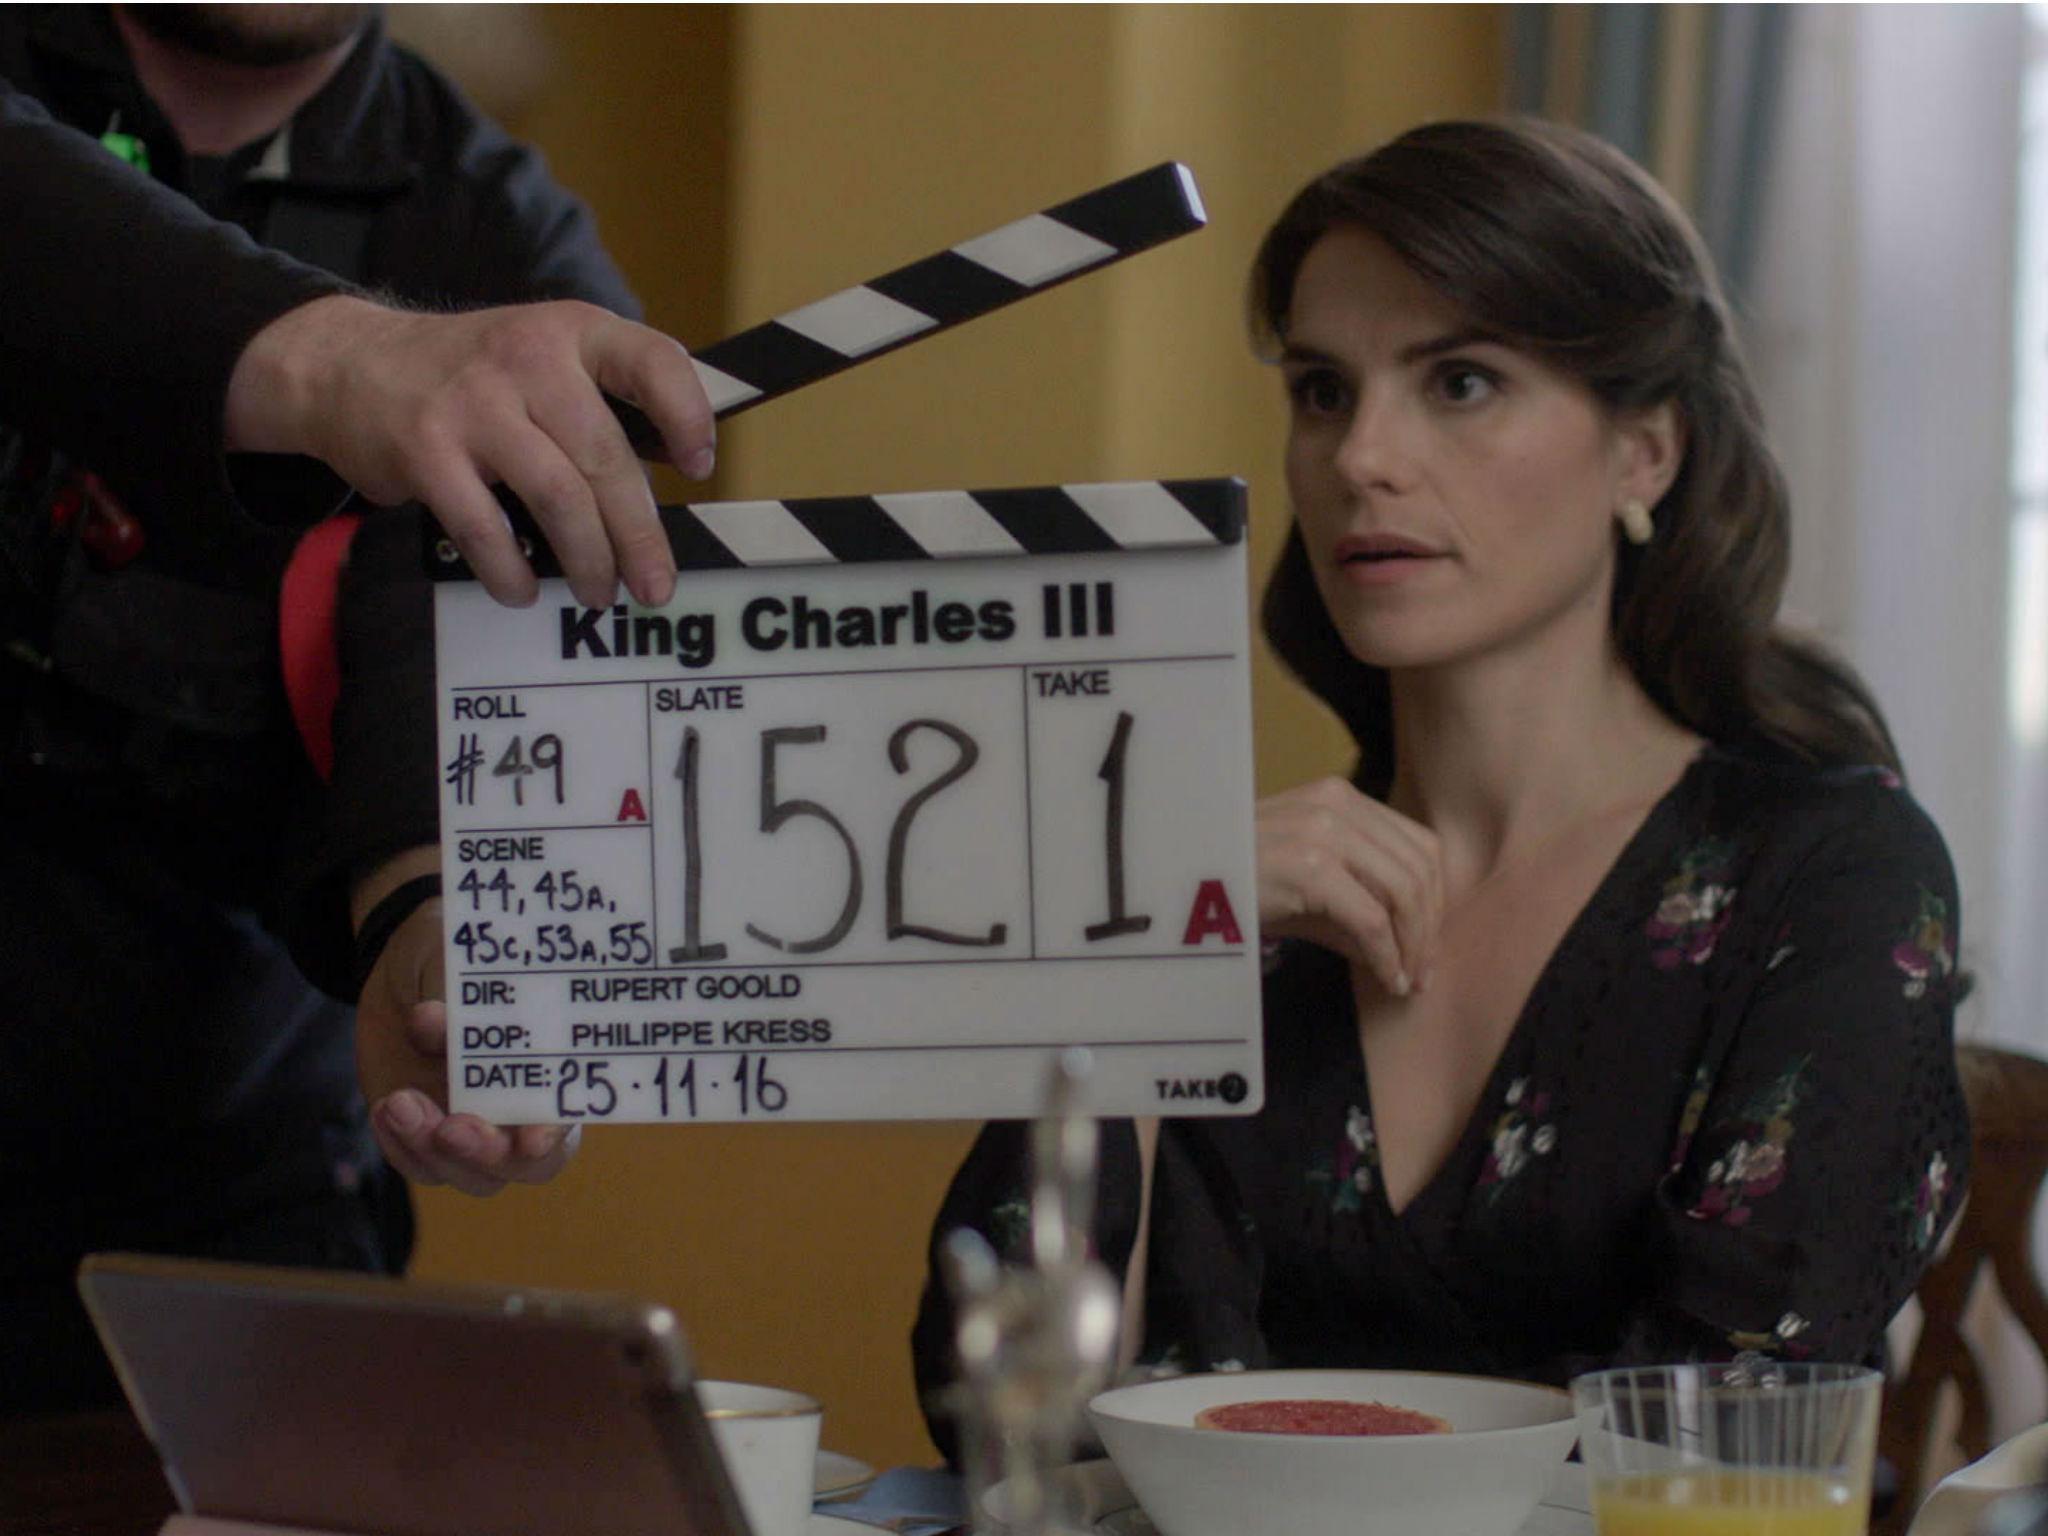 The actress Charlotte Riley as Kate Middleton in the BBC's 'King Charles 111'